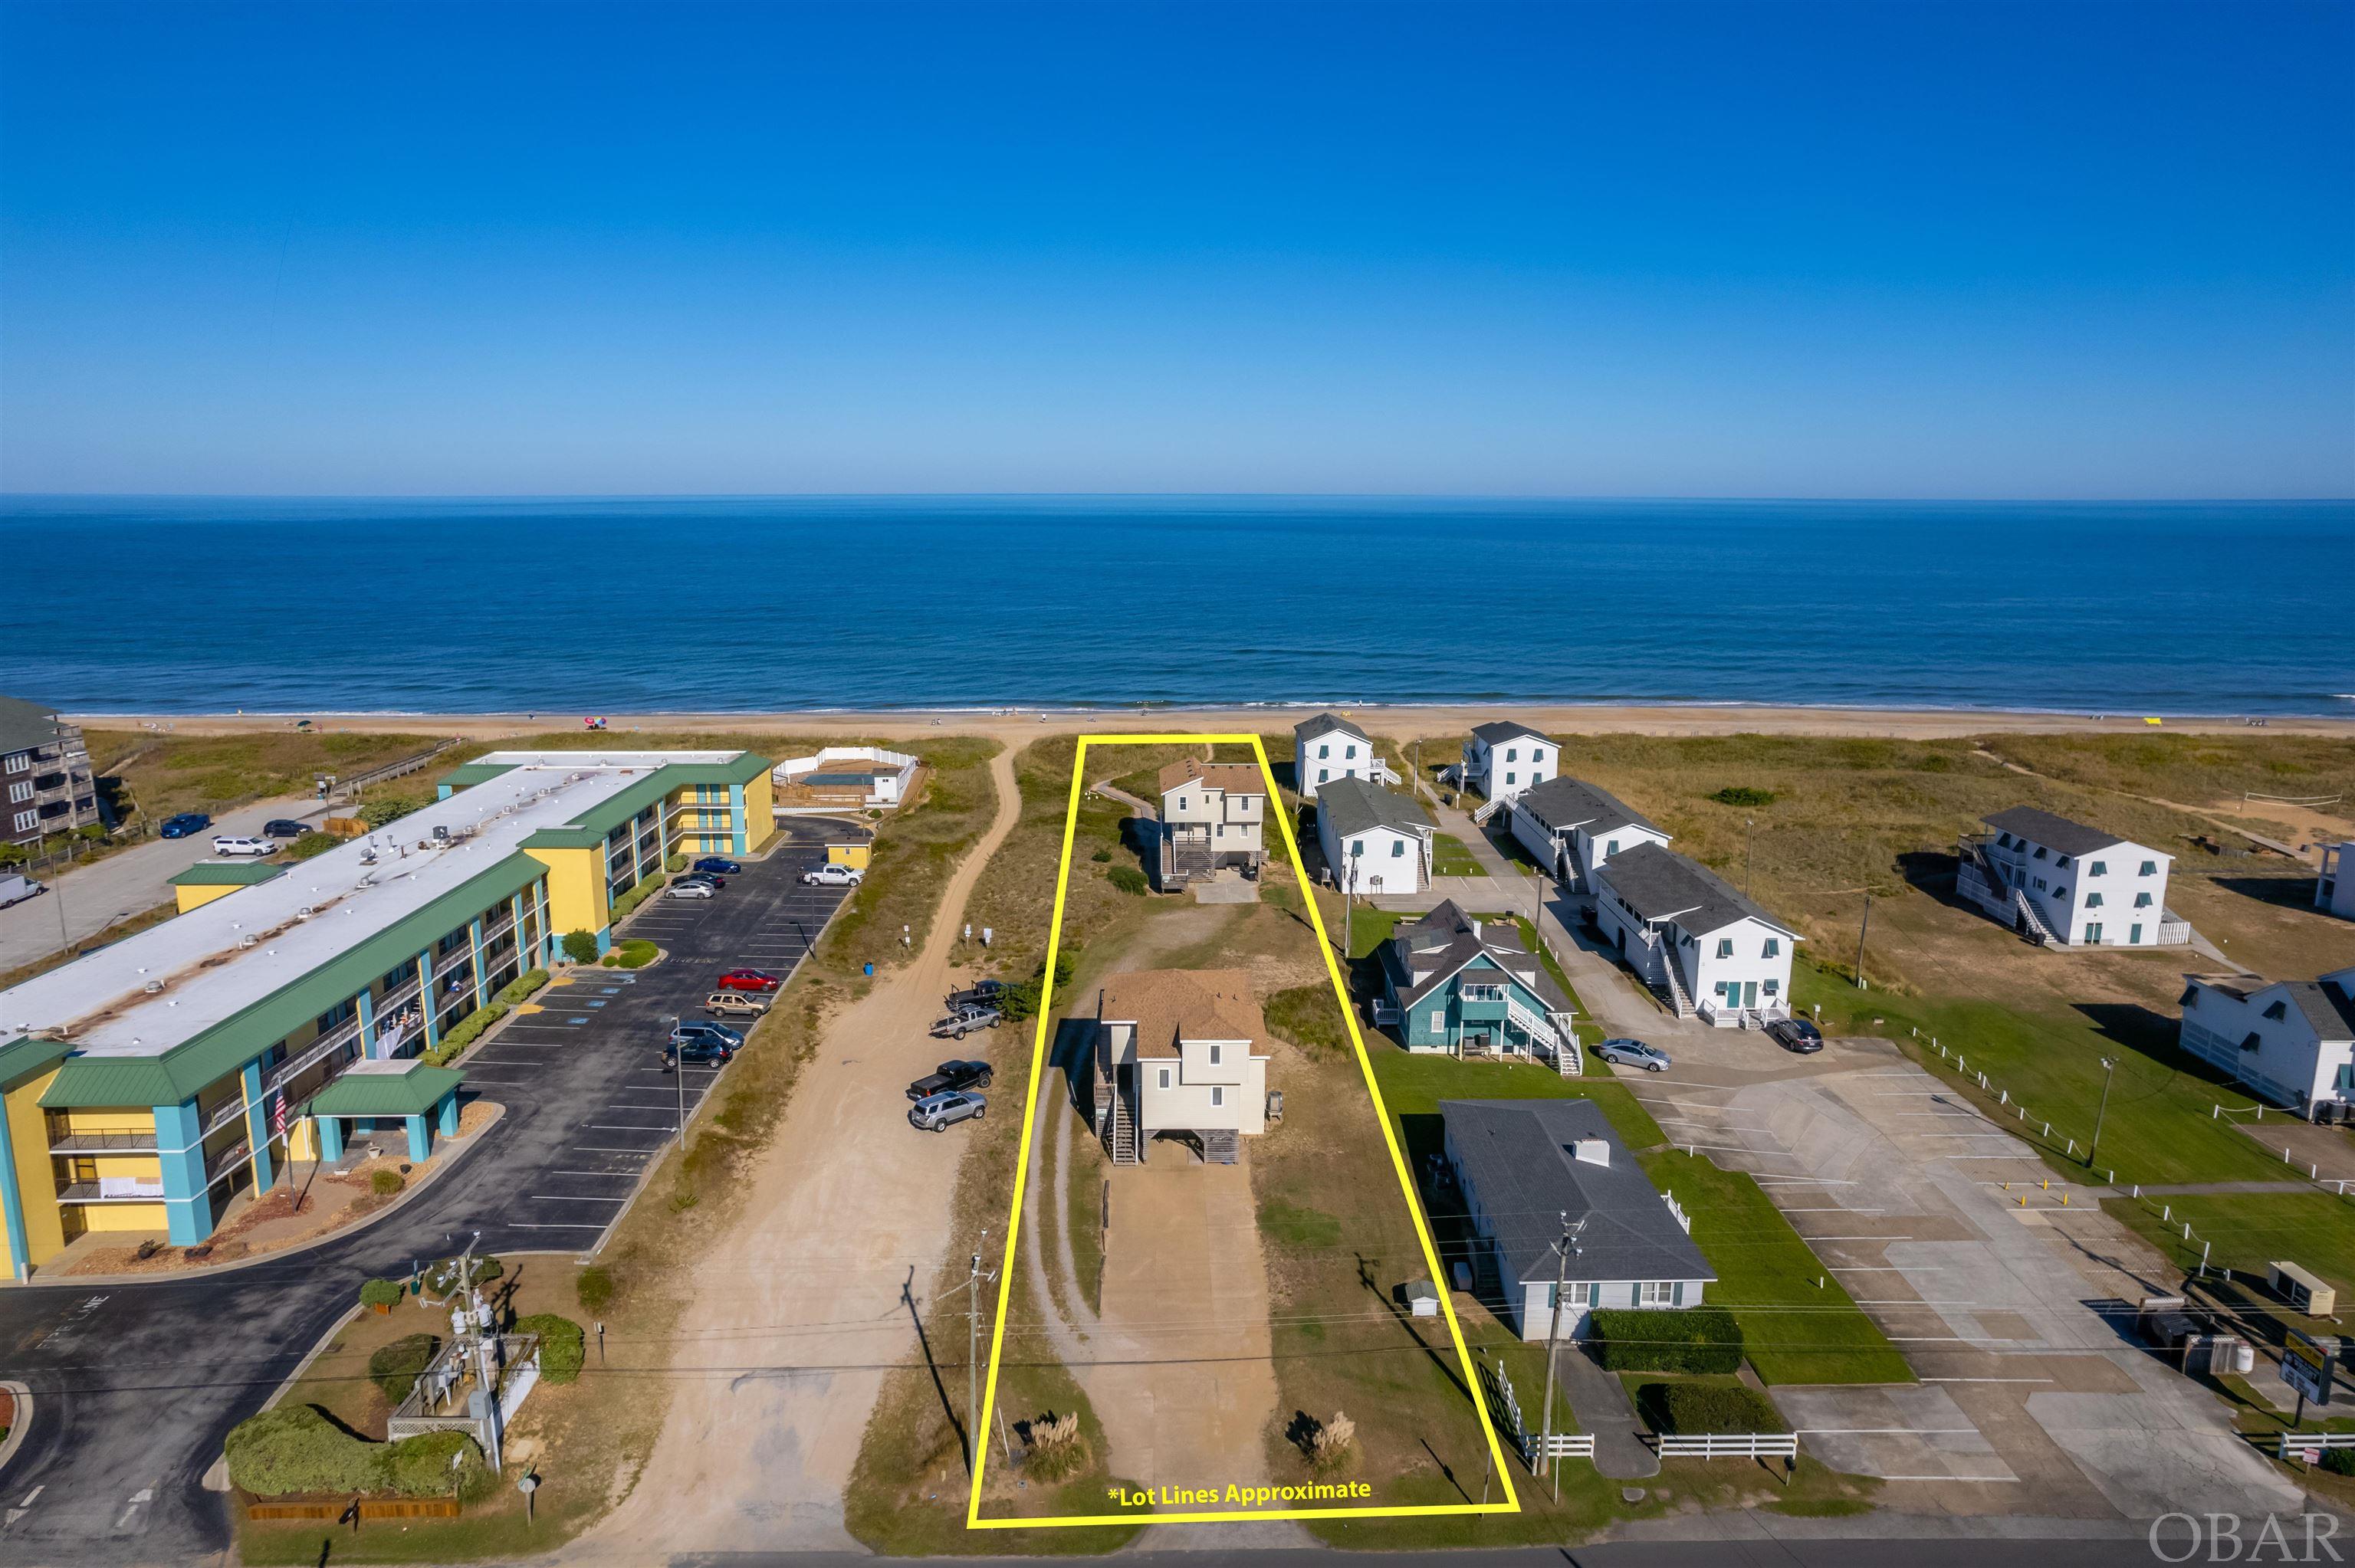 High elevation, 75 foot wide oceanfront lot with 2 existing homes.  Opportunity to start new and rebuild a large oceanfront income producing property or renovate/ update existing homes and room to add another home.  Endless potential.  The 2 homes are each 4 bedrooms and both have views of the ocean and the Wright Brother's Memorial.